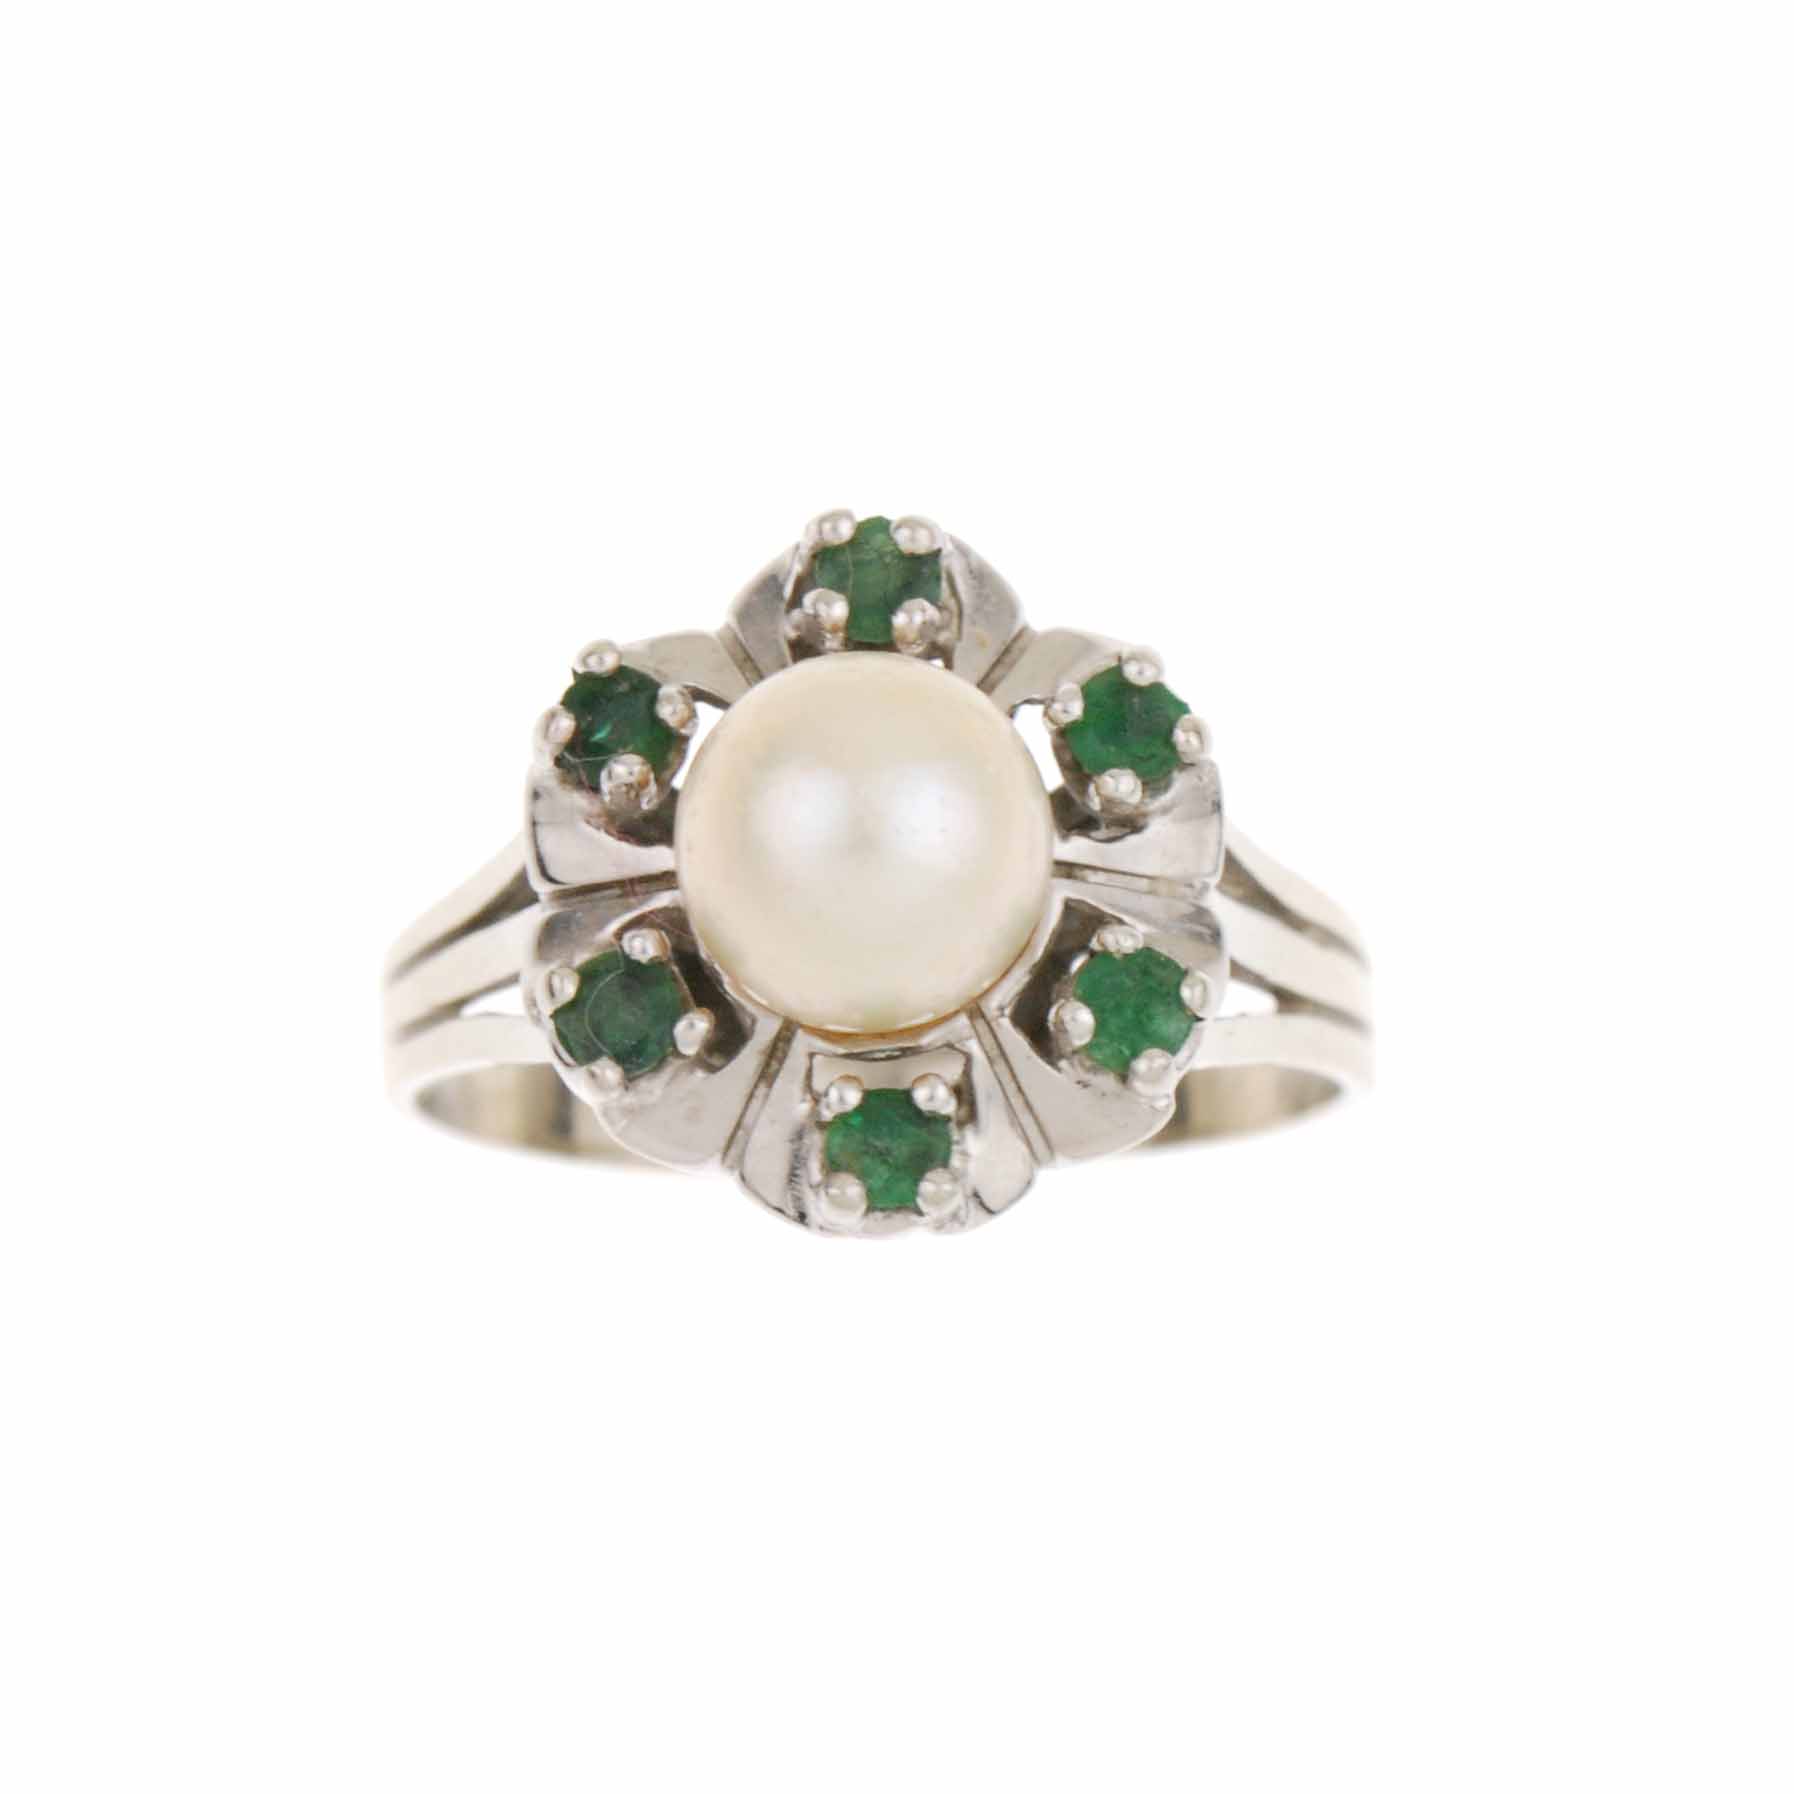 EMERALD AND PEARL RING.